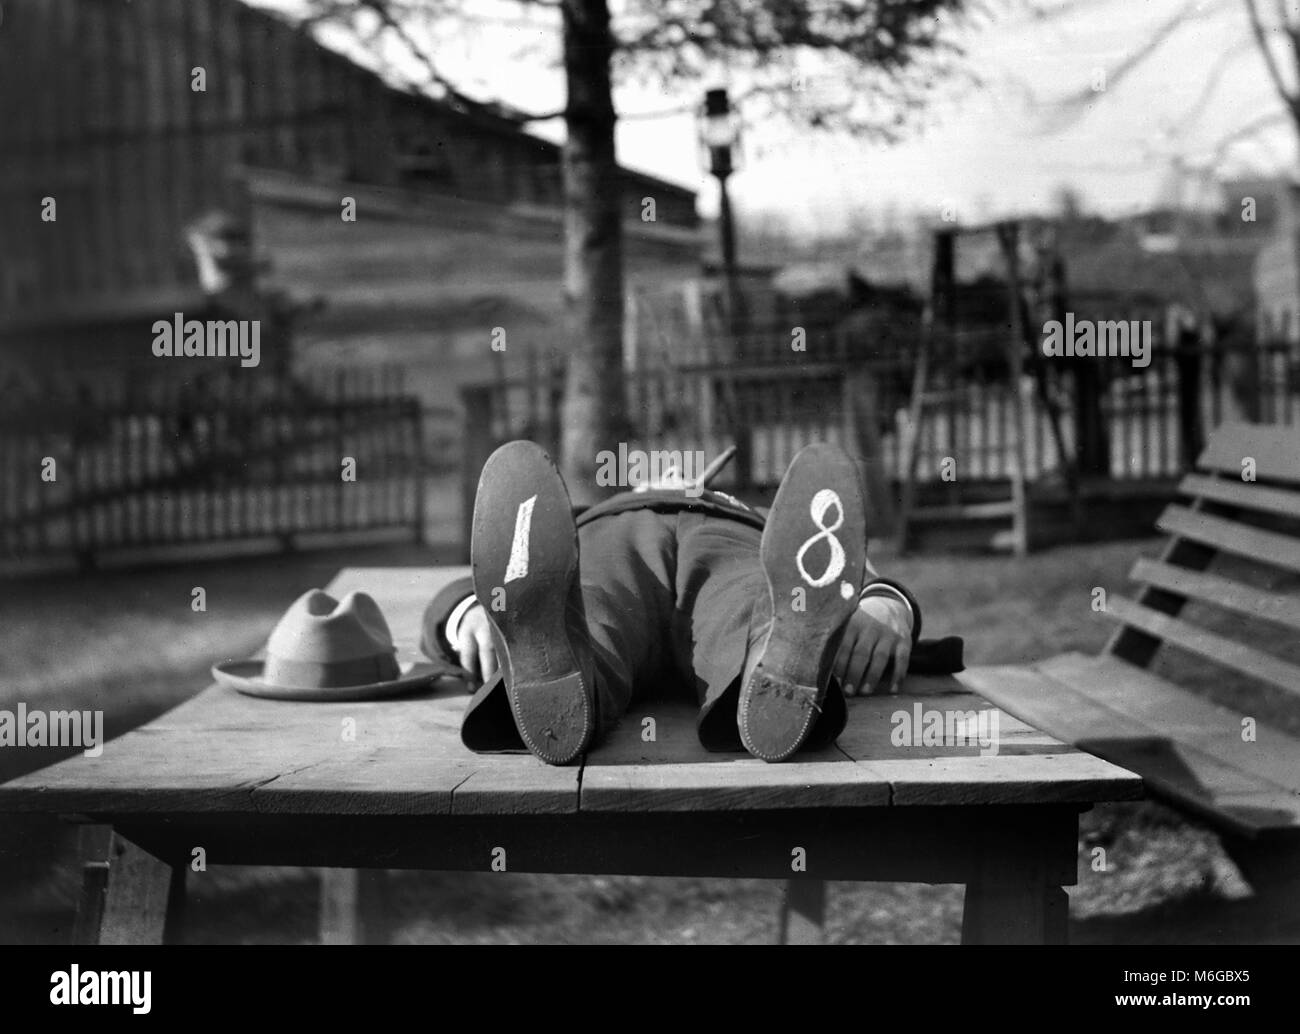 A hatless man rests on an outdoor table with cigar in mouth and writing on his shoes, ca. 1910. Stock Photo